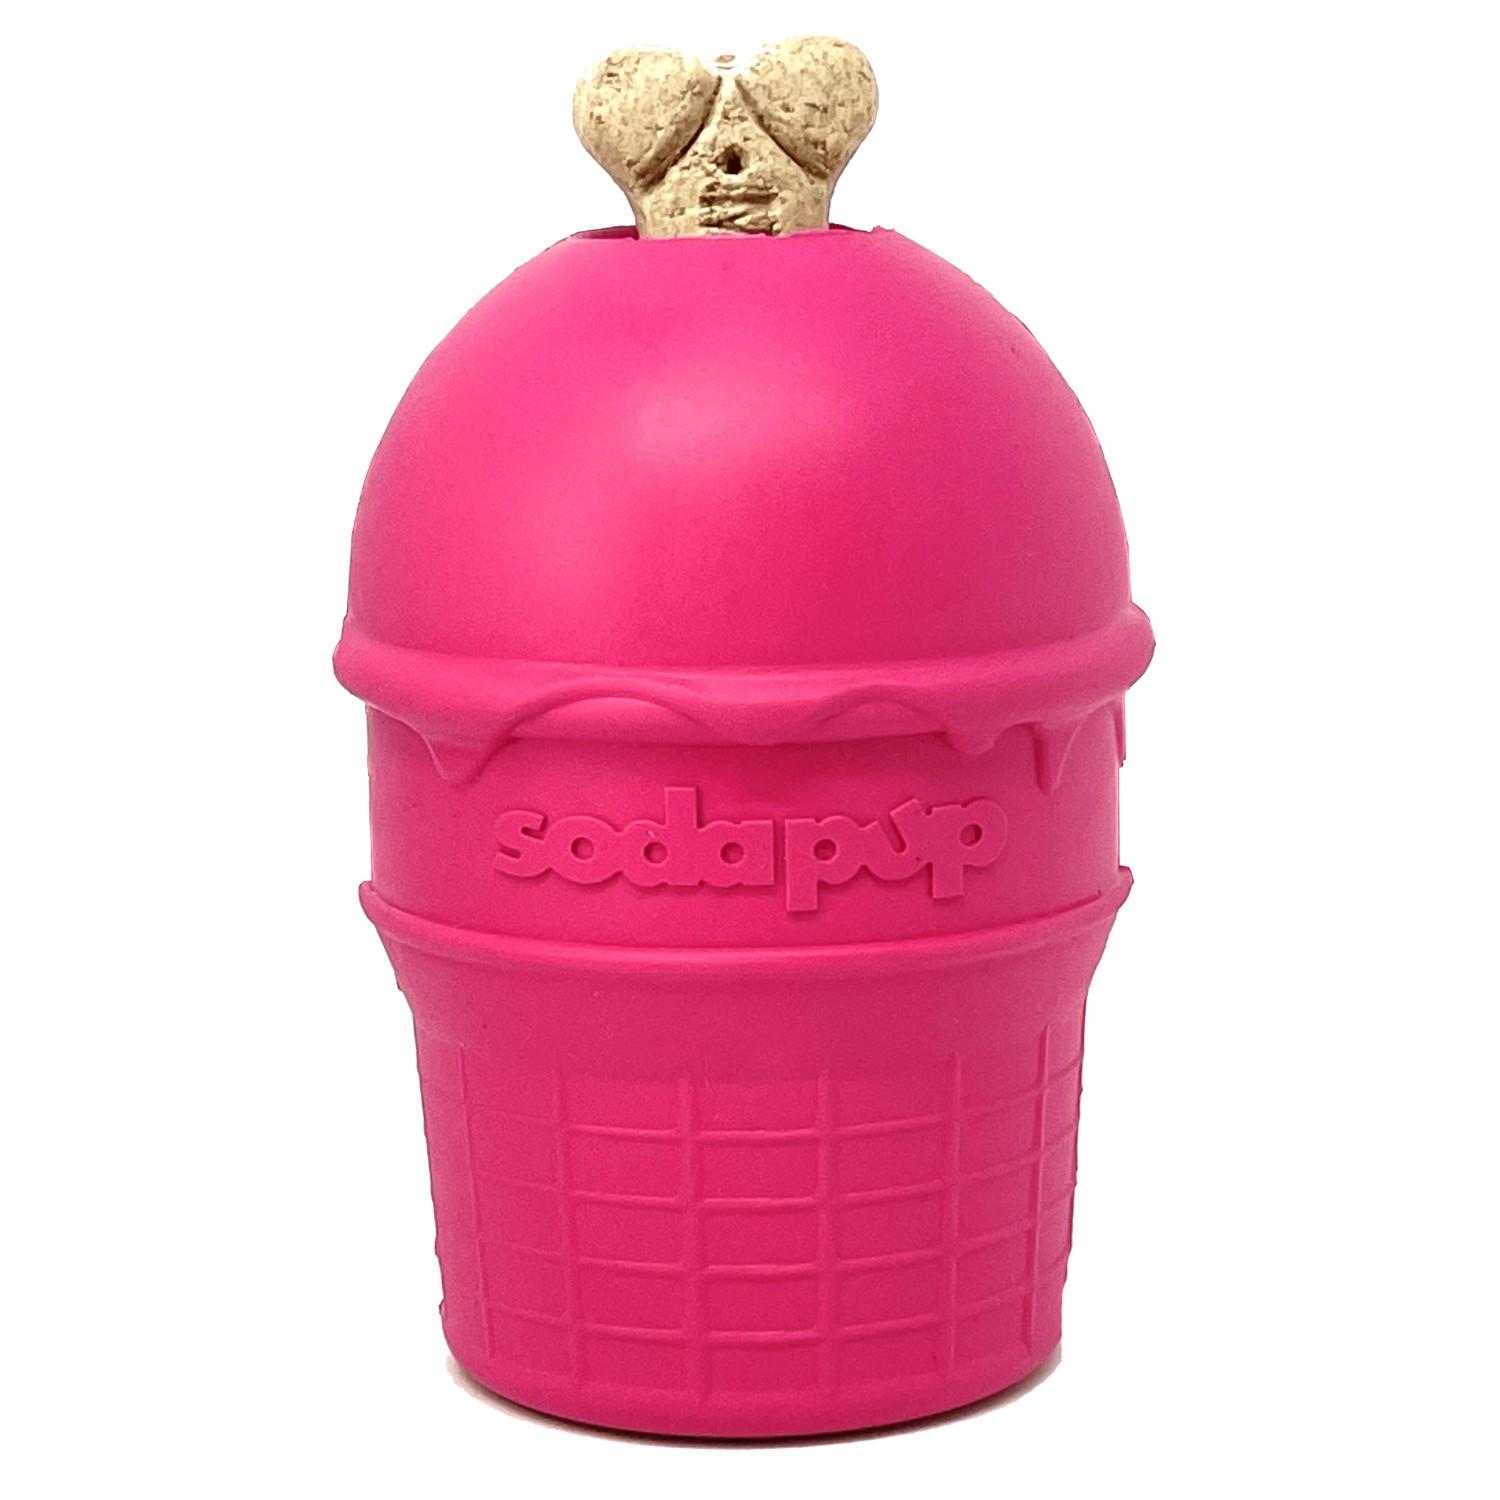 SodaPup Ice Cream Cone Treat Dispensing Dog Toy - Pink